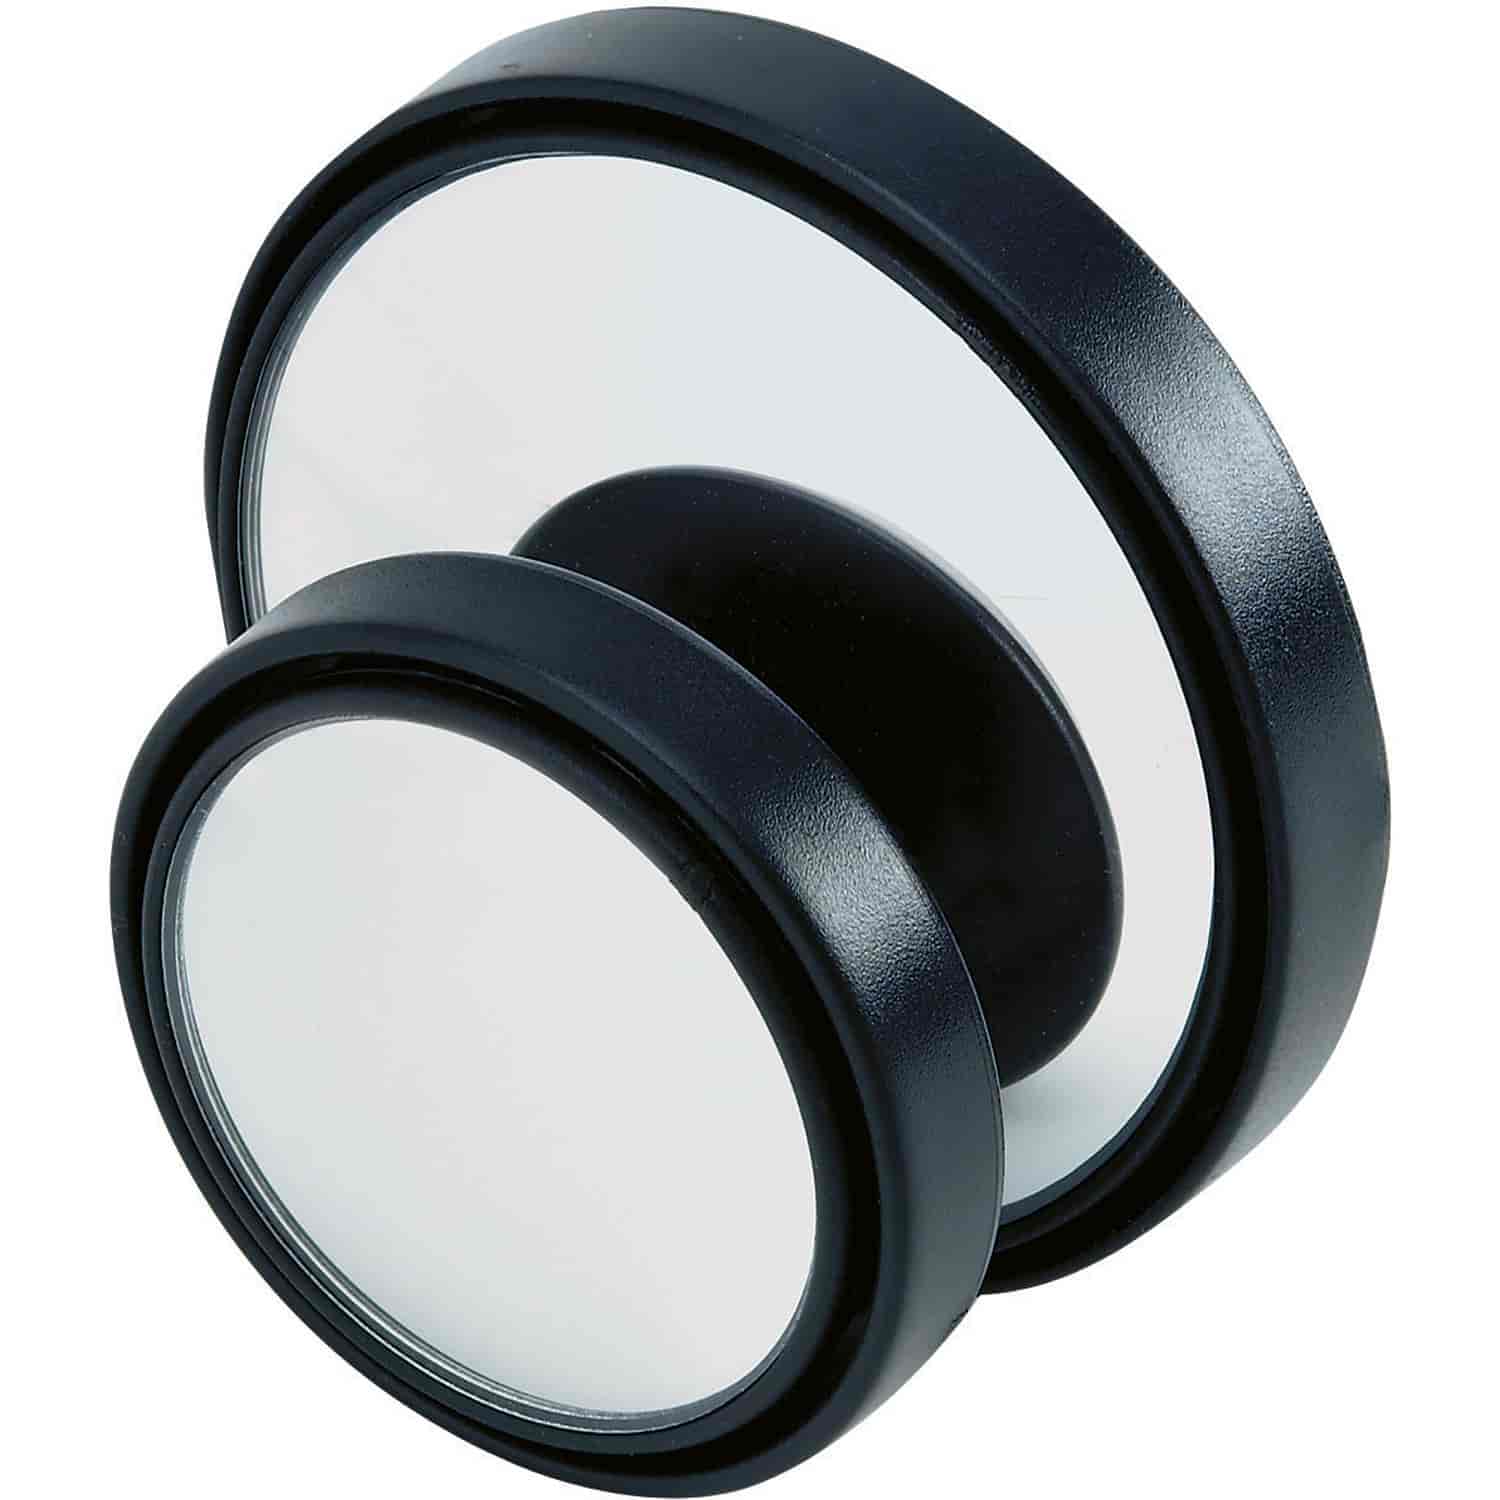 Round Spot Mirror 3 Round Adjustable Easy Stick-on Installation Convex Lens increases visibility Ful